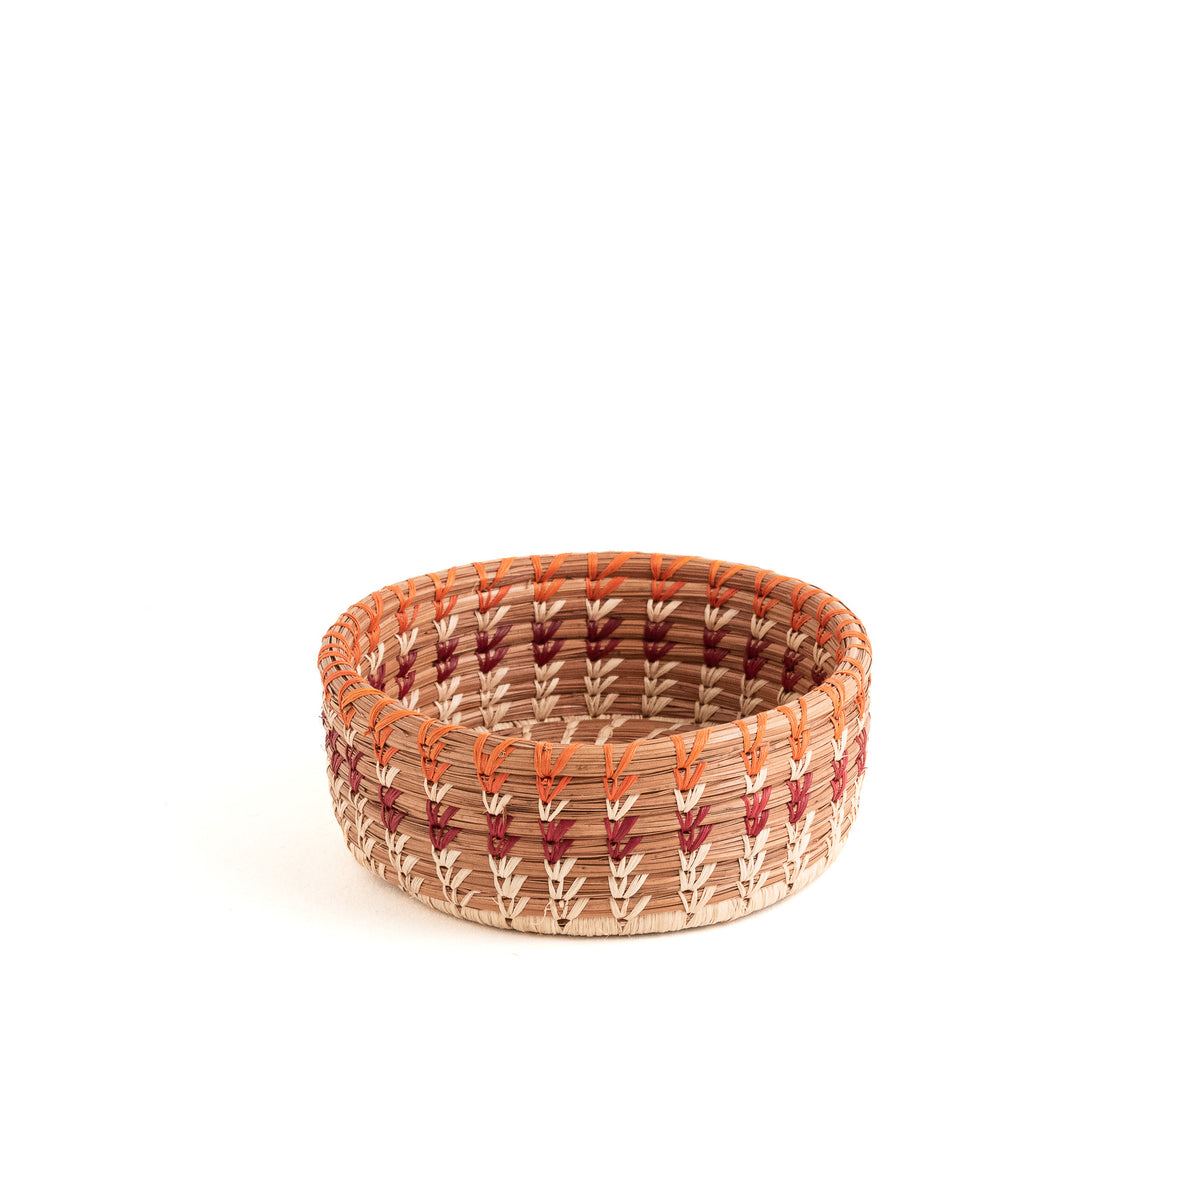 Small straight-sided pine needle basket with orange accent